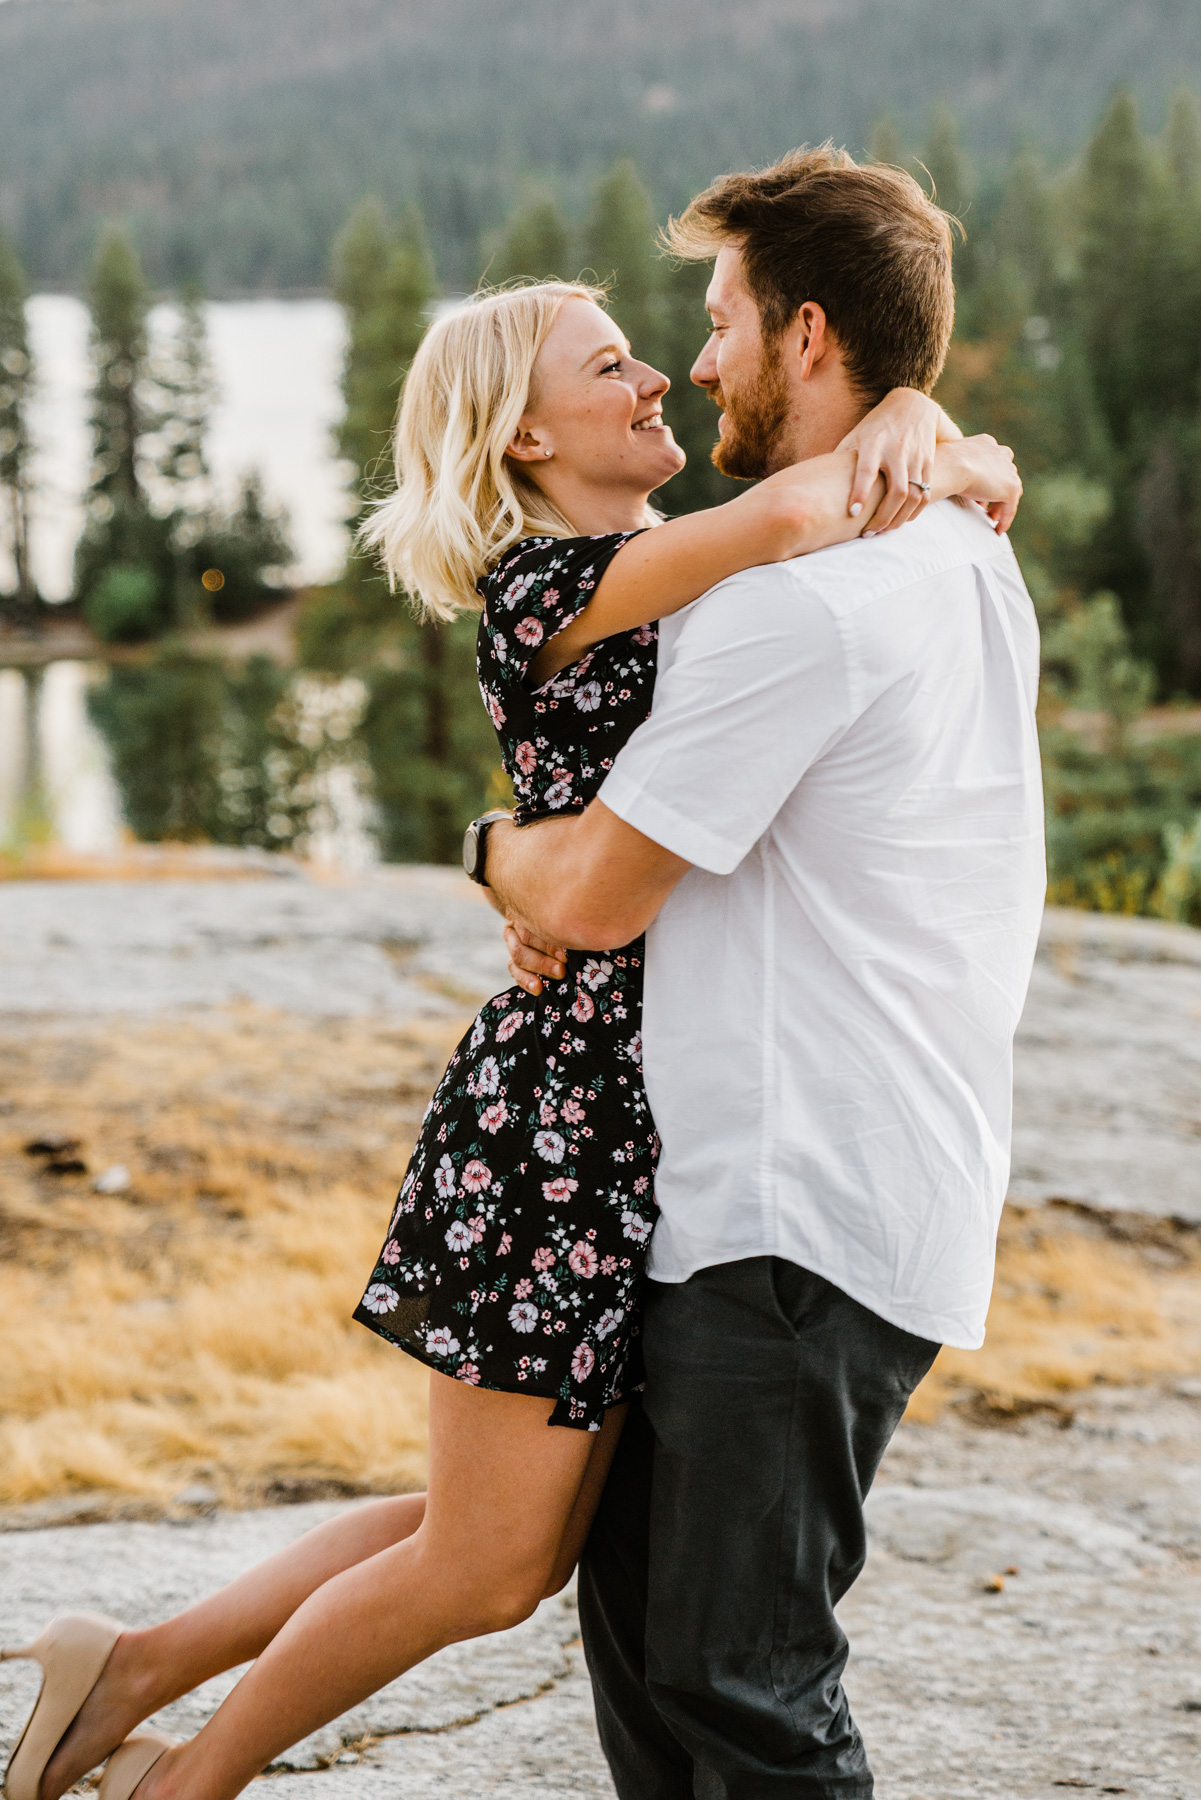 Shaver Lake Engagement Portraits - Meghan and Clay -  by Bessie Young Photography 2018 A7R2-271.jpg